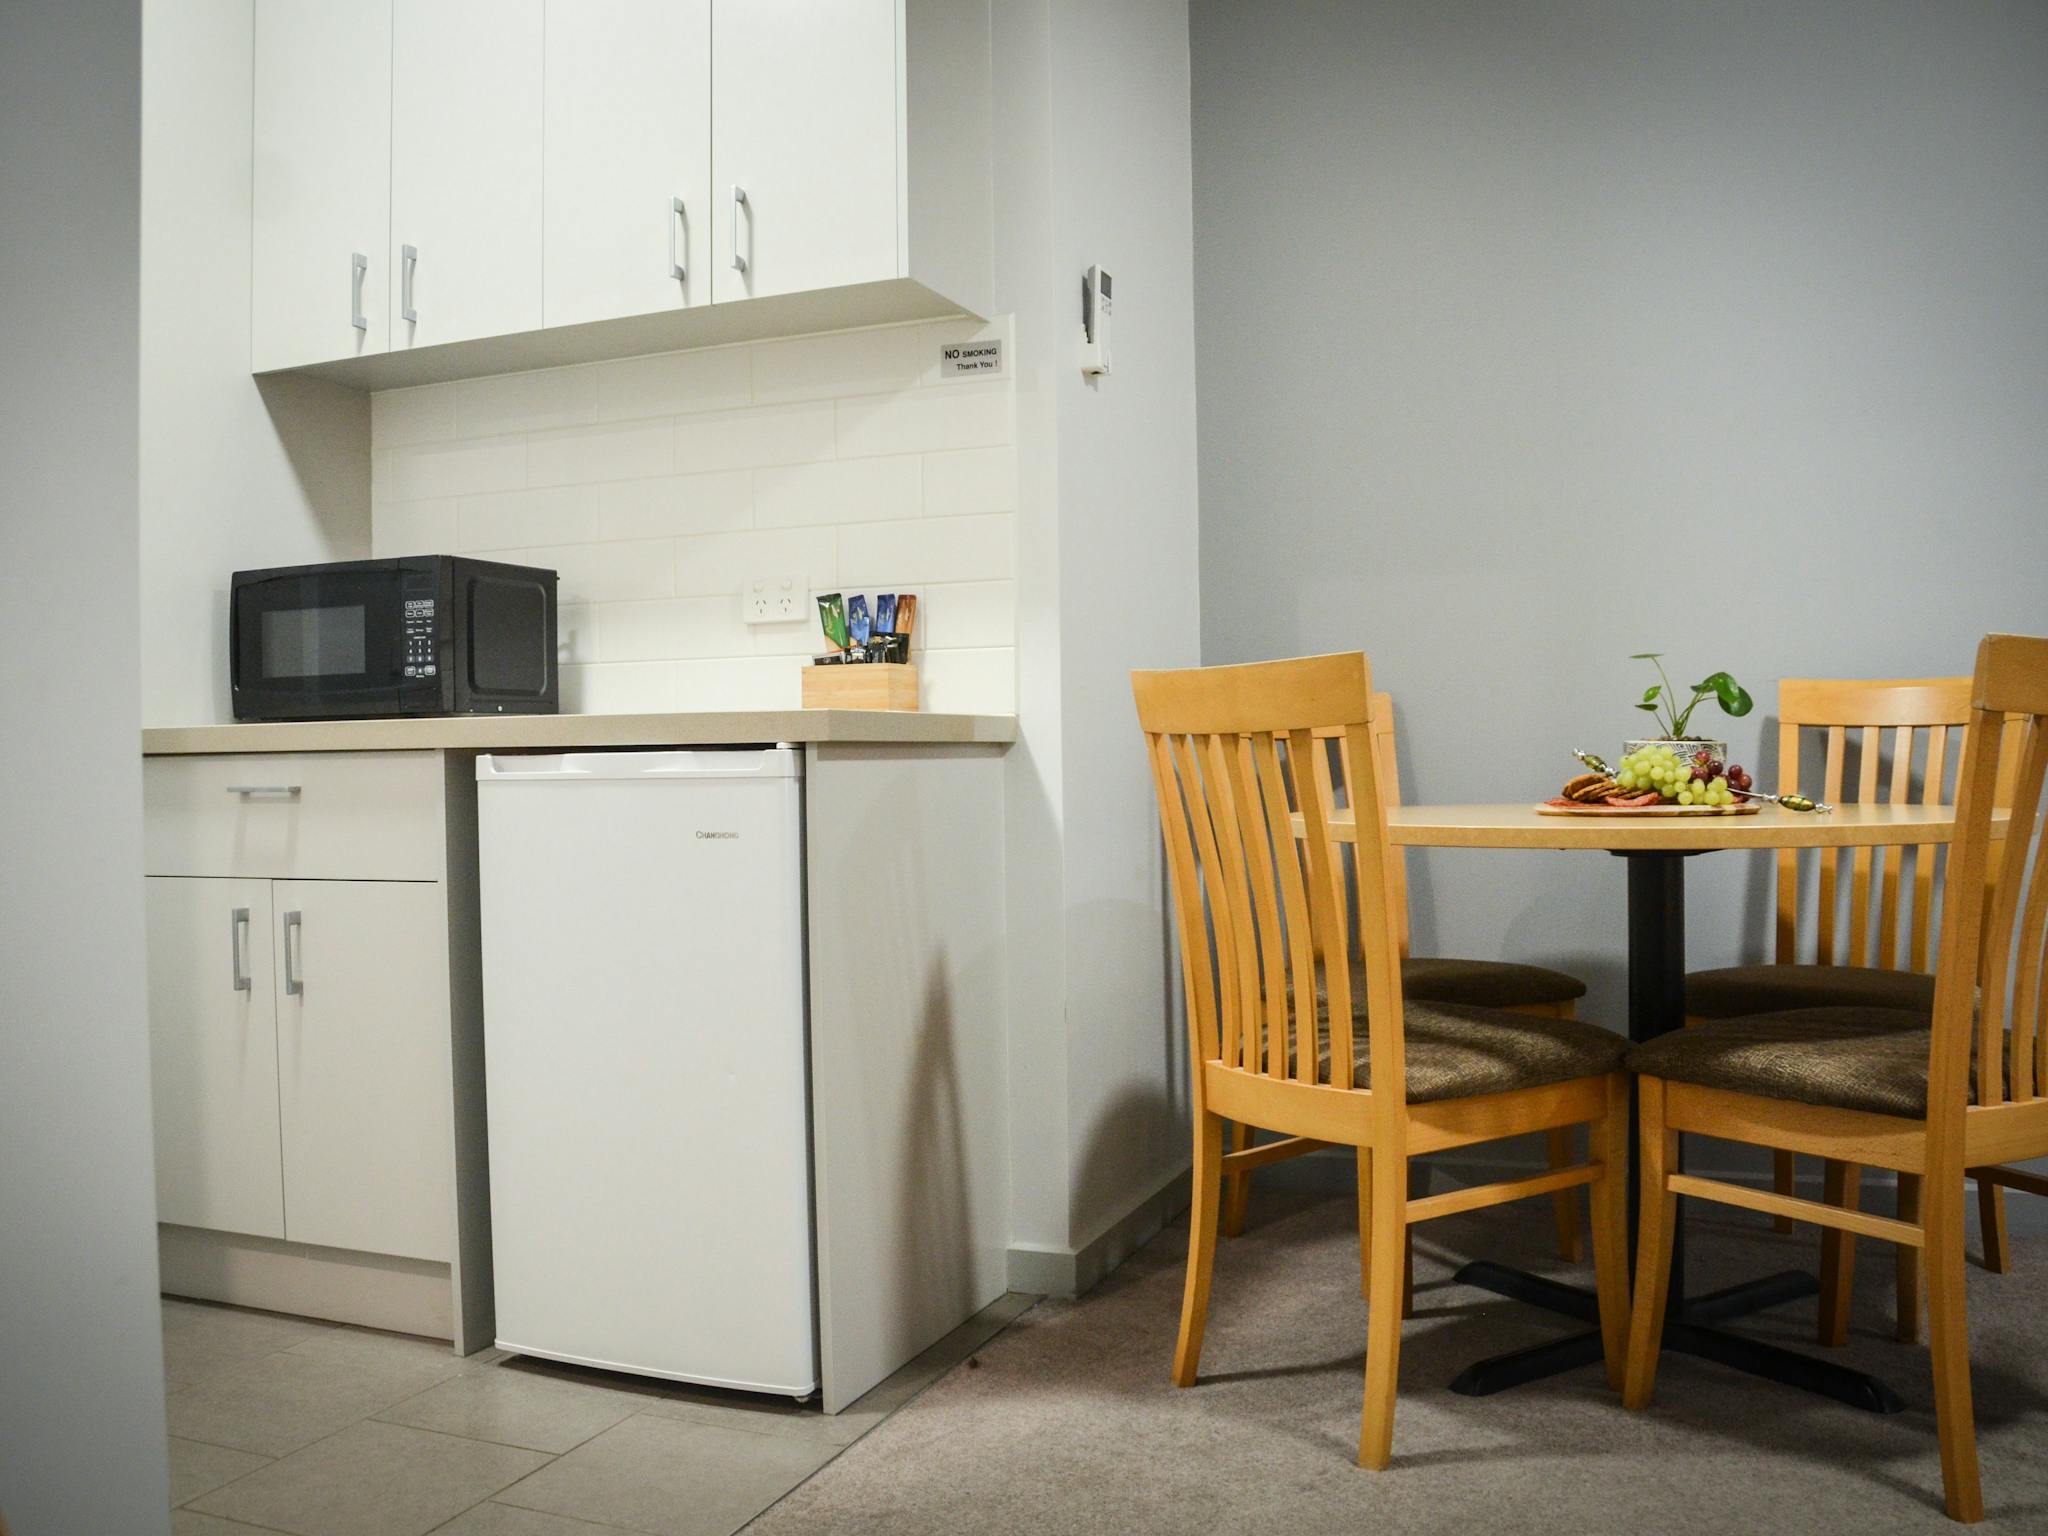 Mansfield Apartments include kitchenette facilities